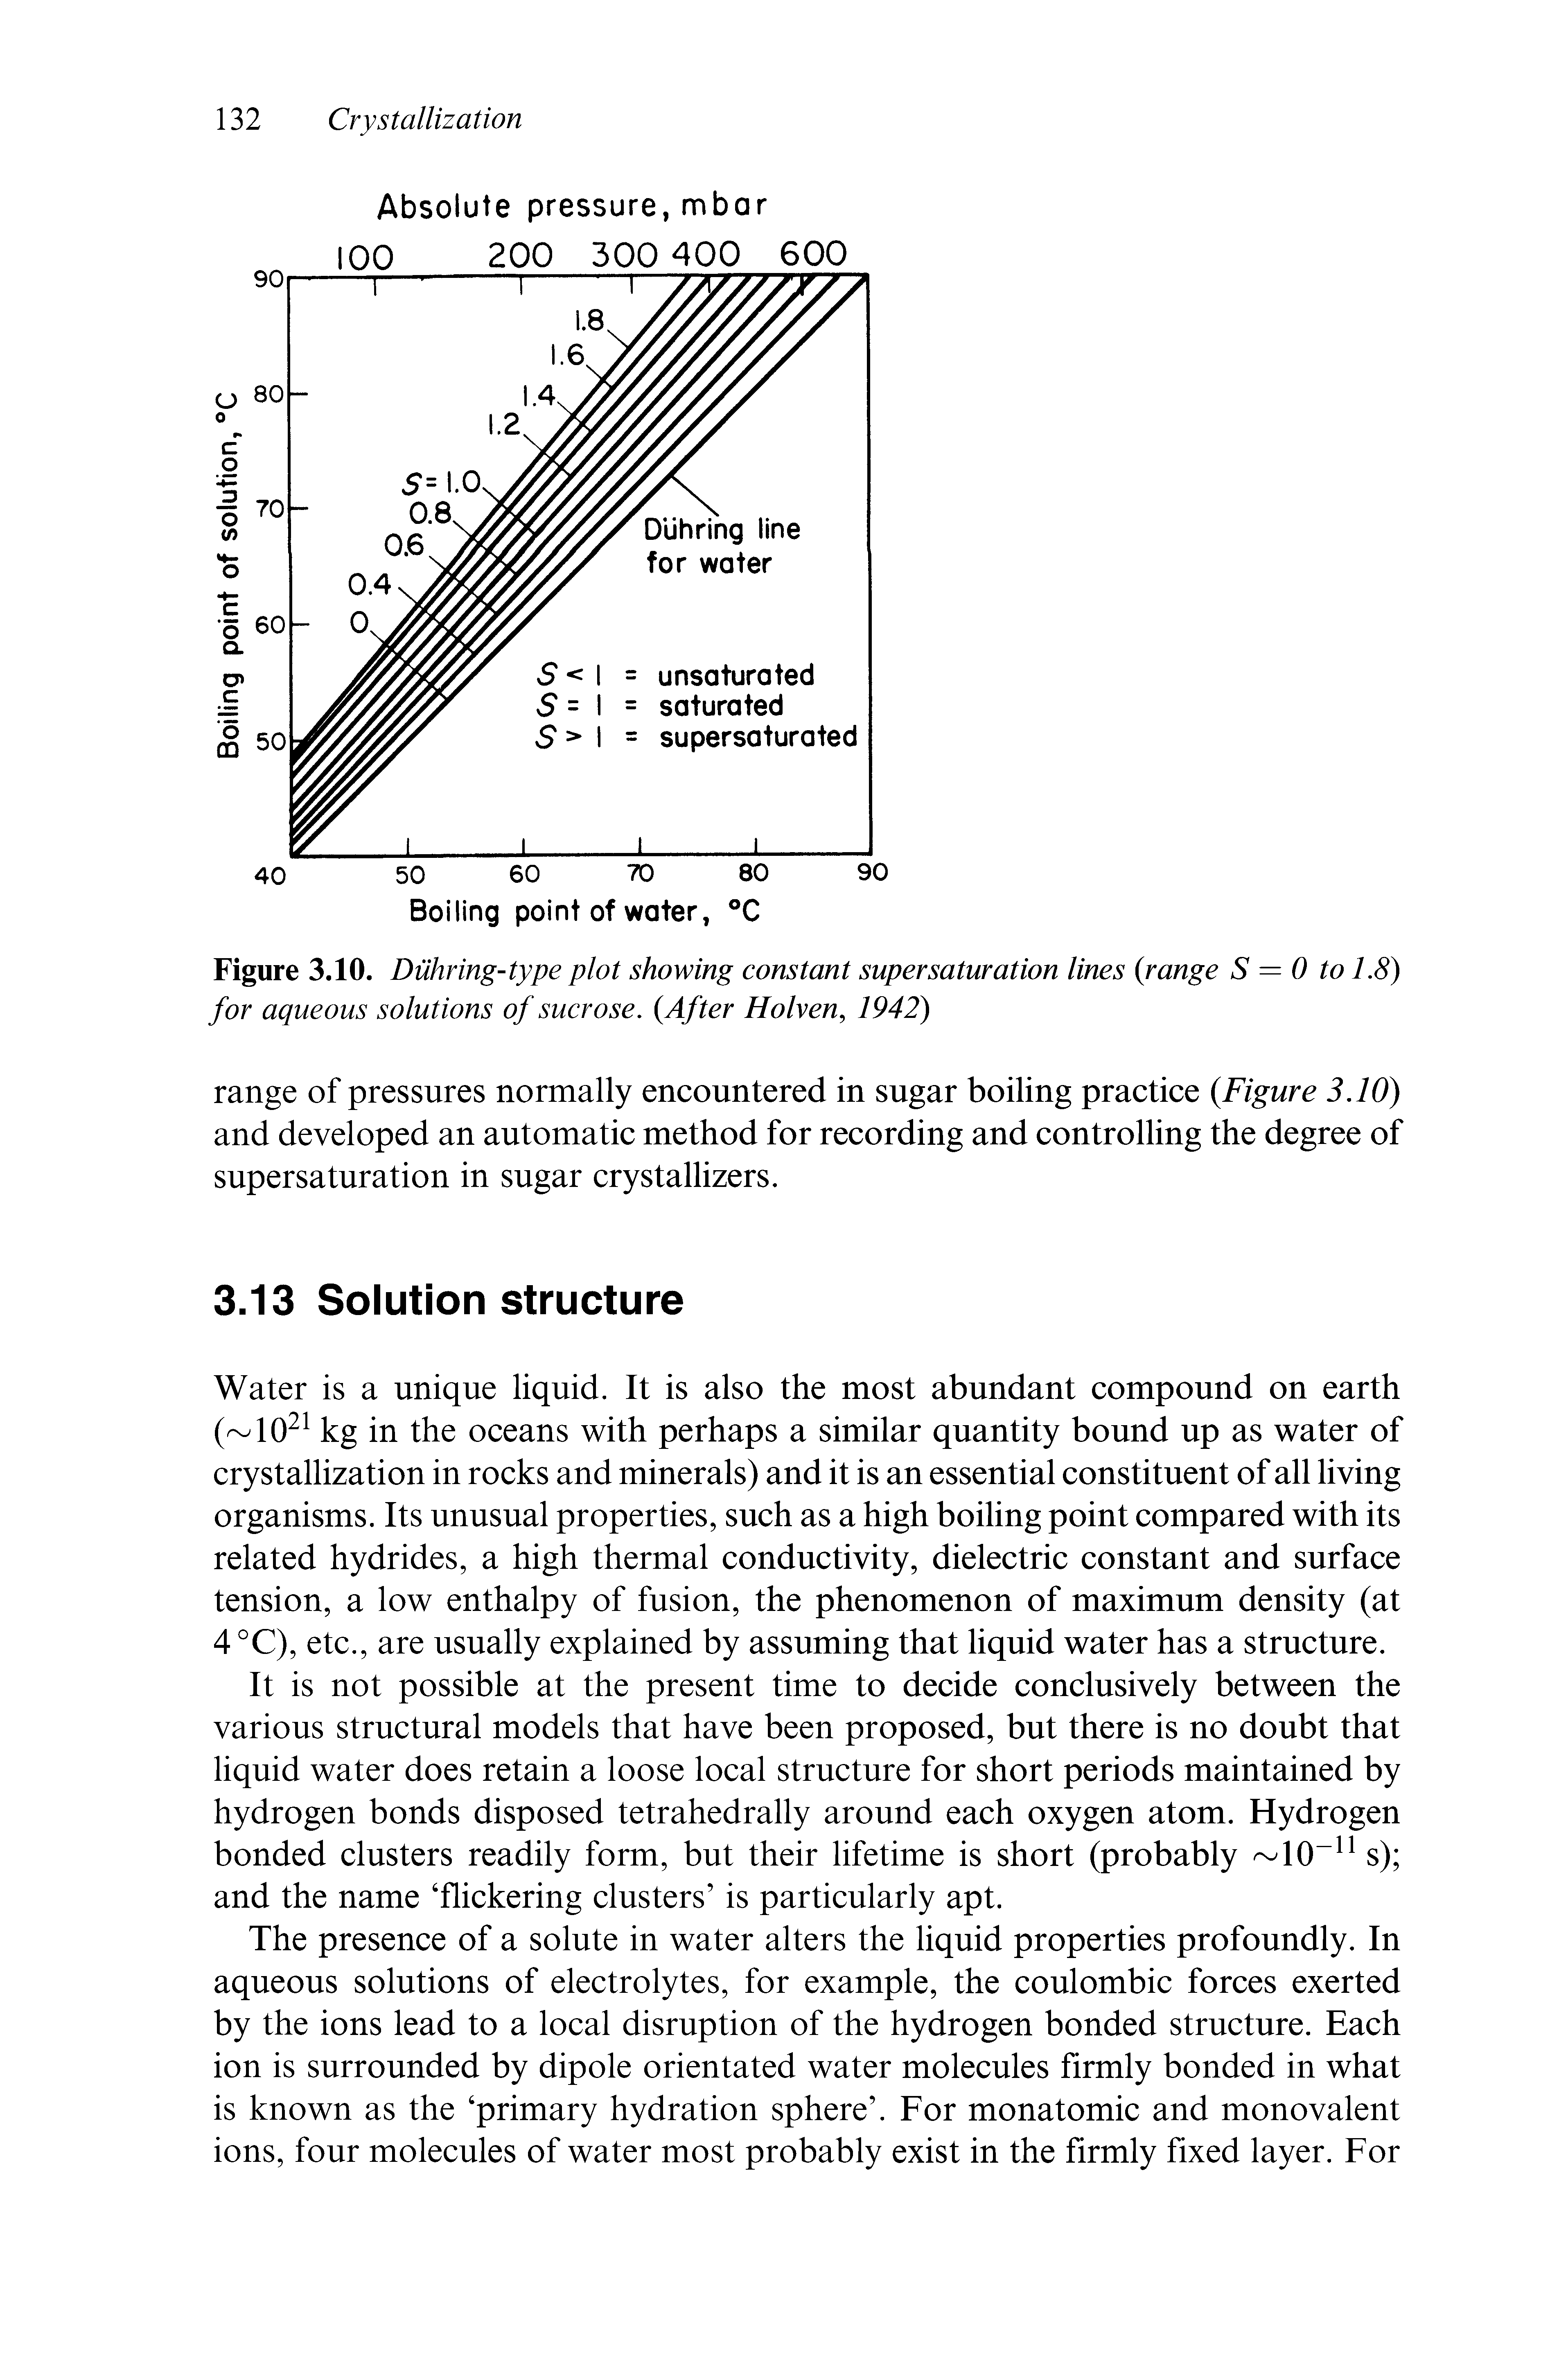 Figure 3.10. Duhring-type plot showing constant super saturation lines range S = 0 to 1.8) for aqueous solutions of sucrose. After Holven, 1942)...